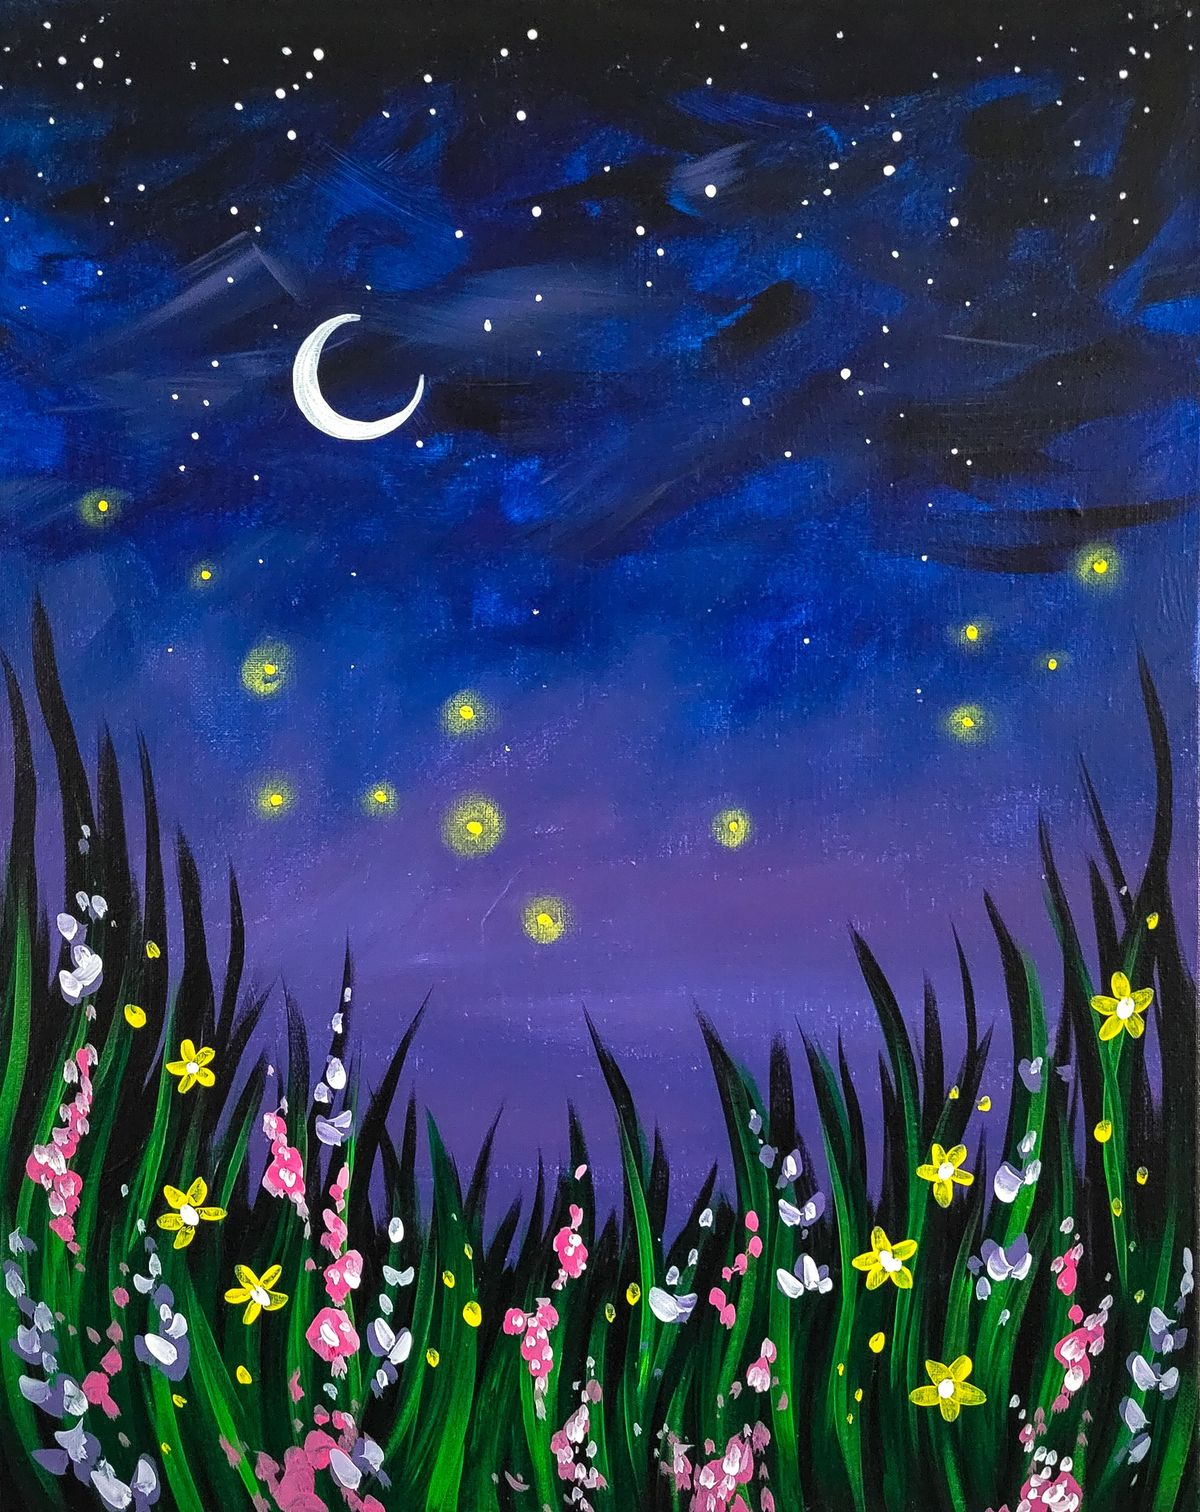 Paint + Sip: "Field of Fireflies" at Stable Craft Brewing